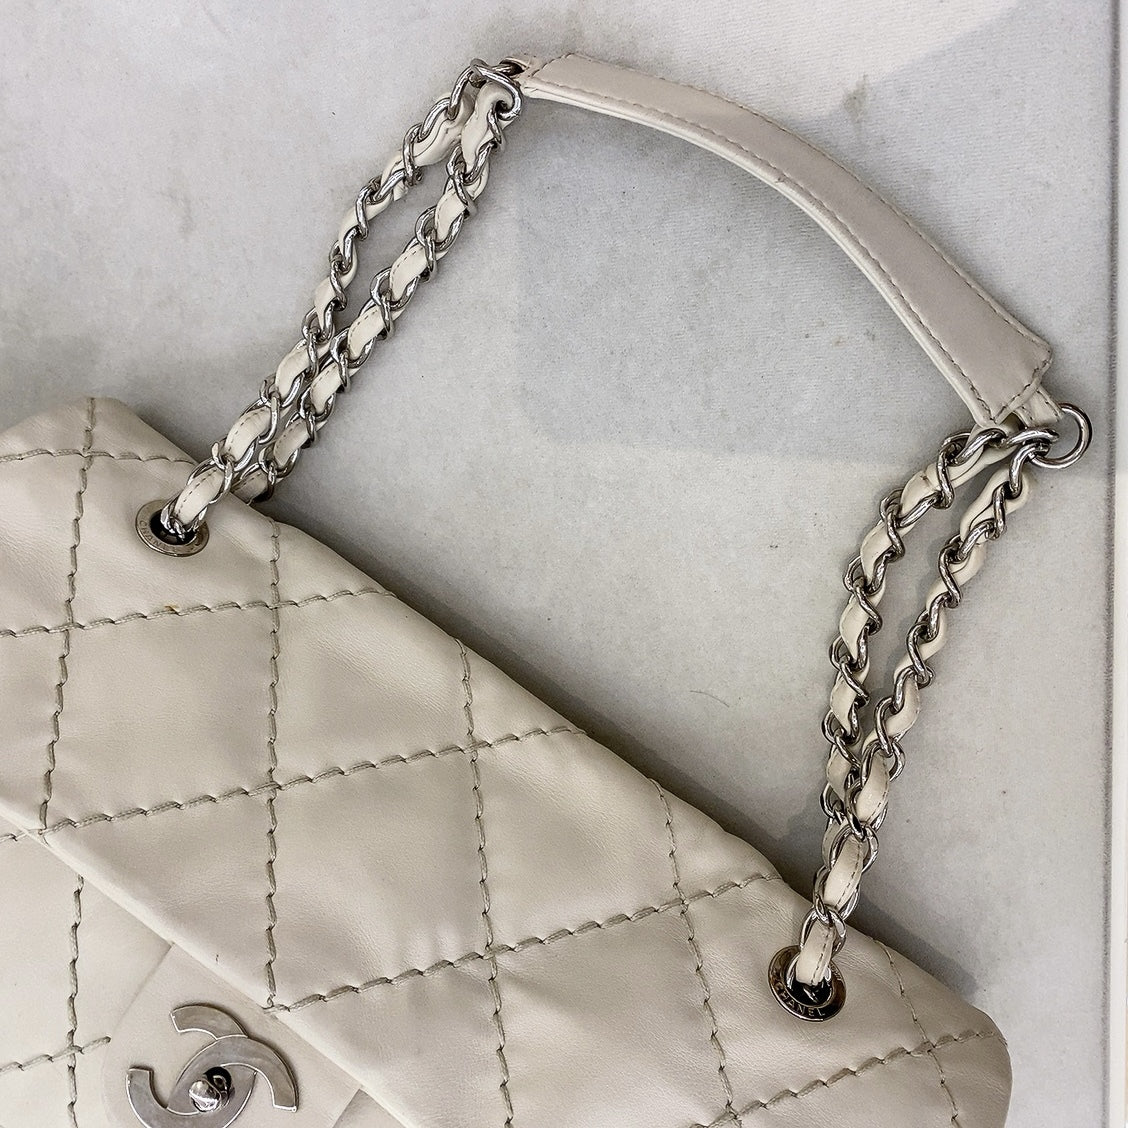 Chanel Quilted Expandable Ligne Flap Bag